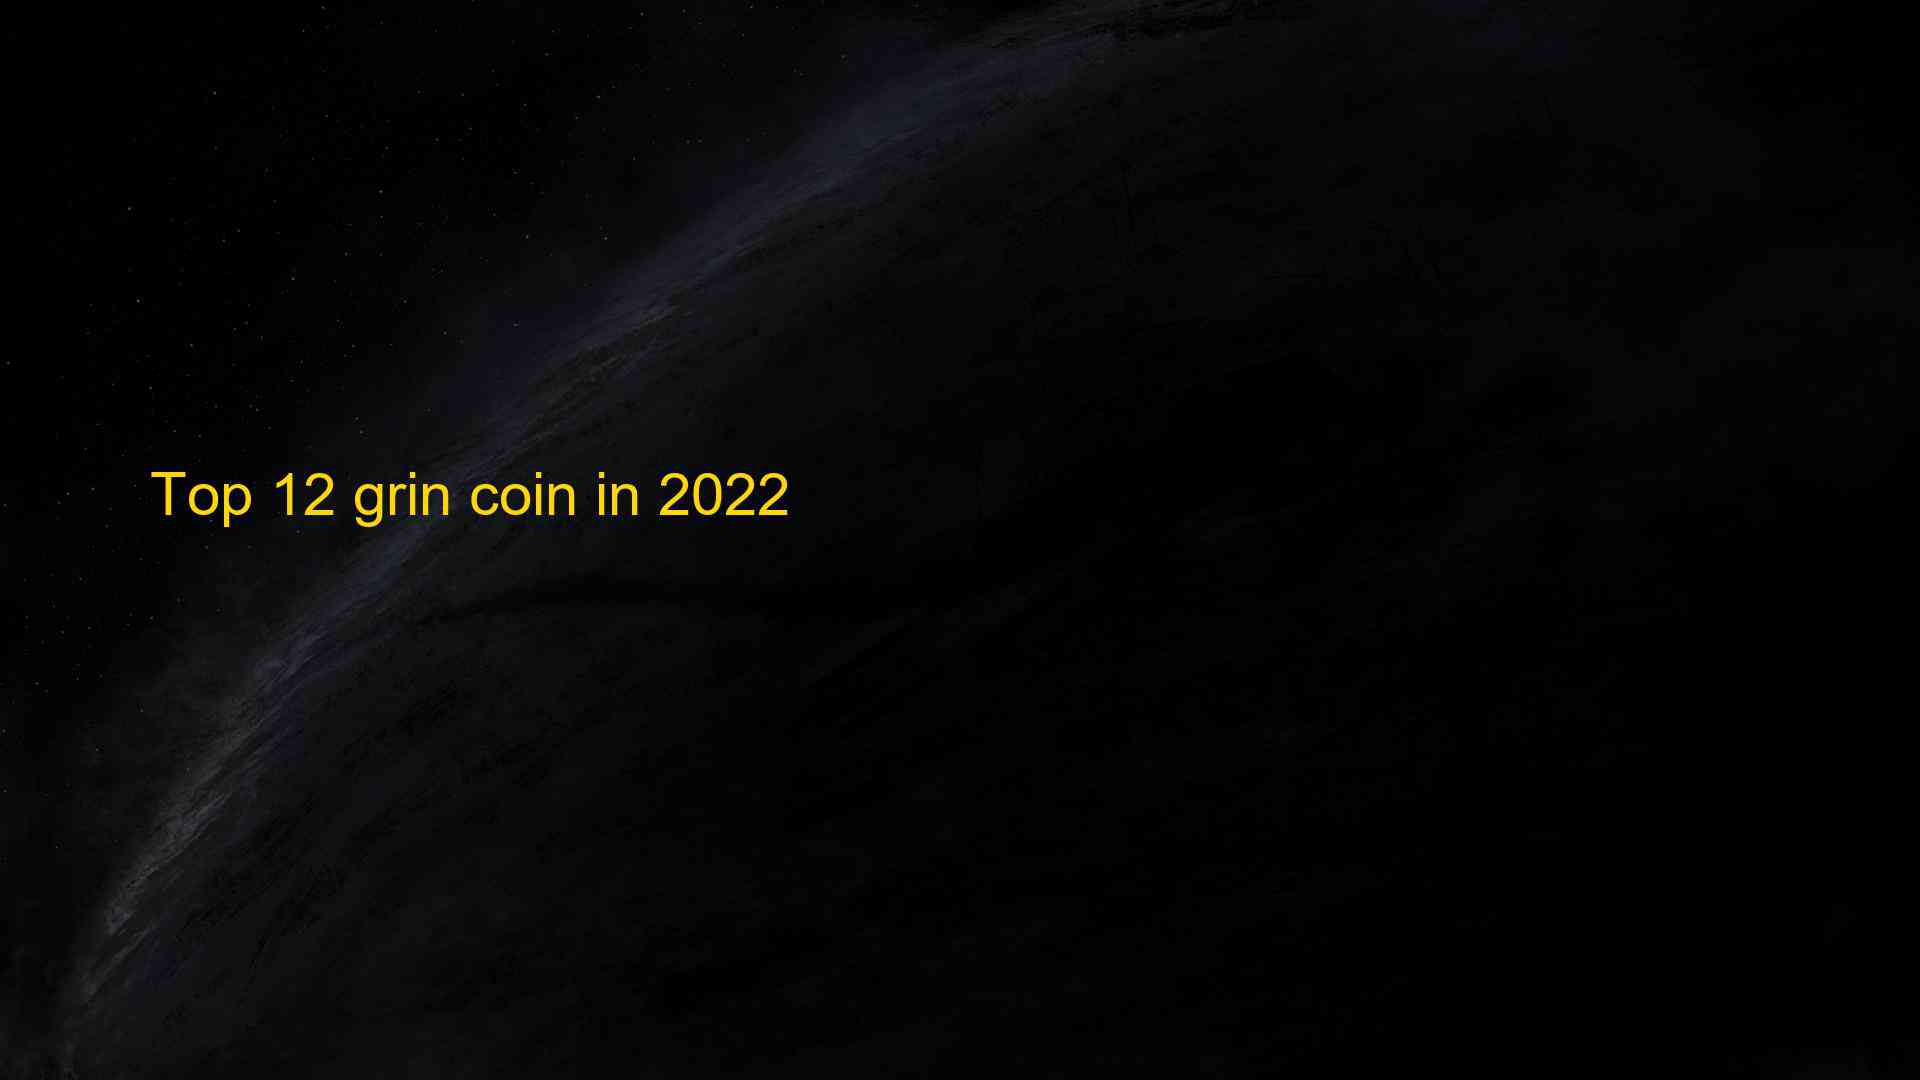 Top 12 grin coin in 2022 1659944779